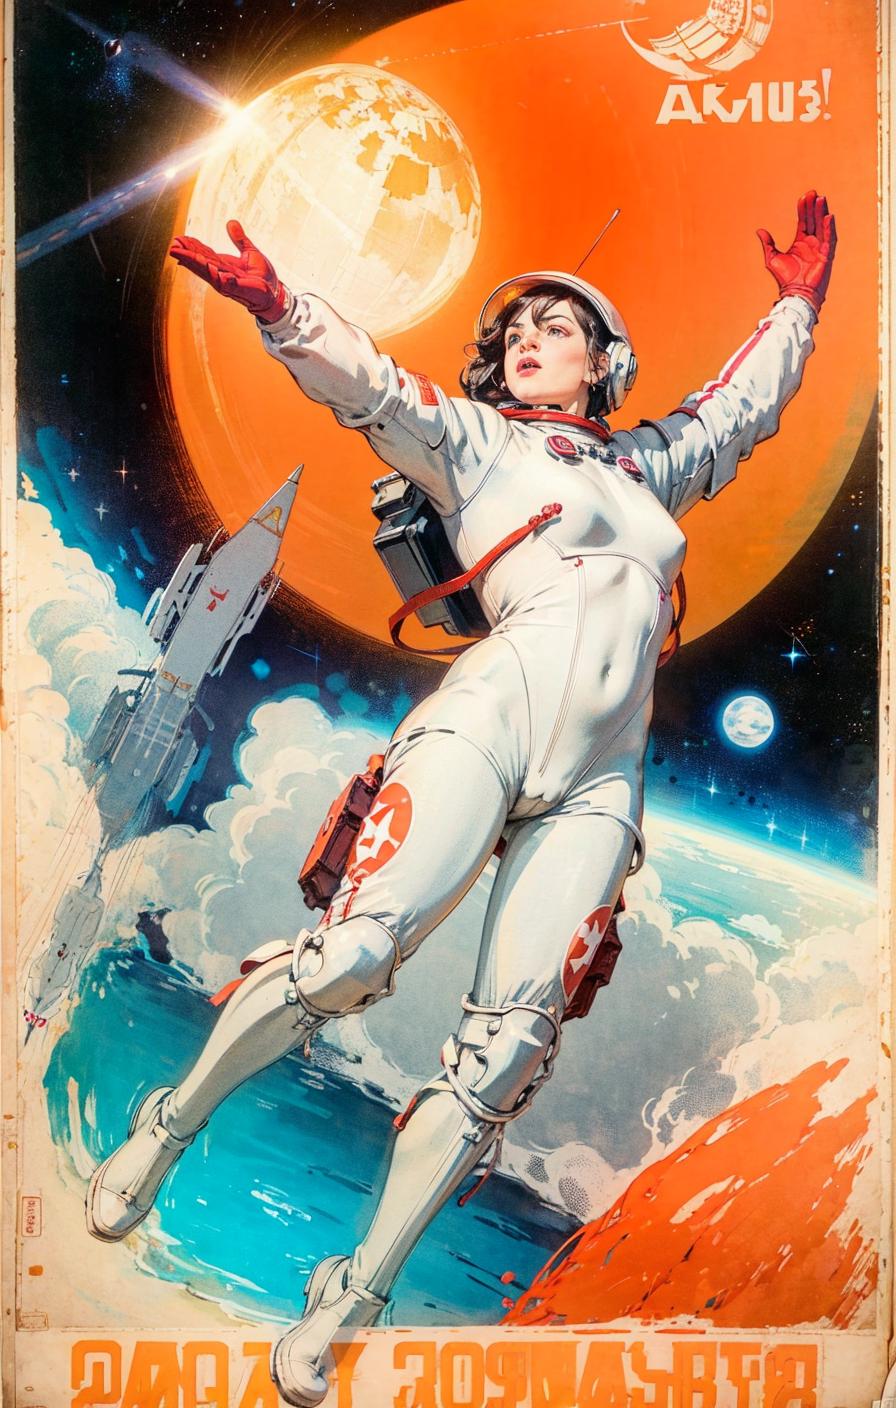 A Space-Themed Poster Featuring a Woman in a White Spacesuit and a Rocket Ship